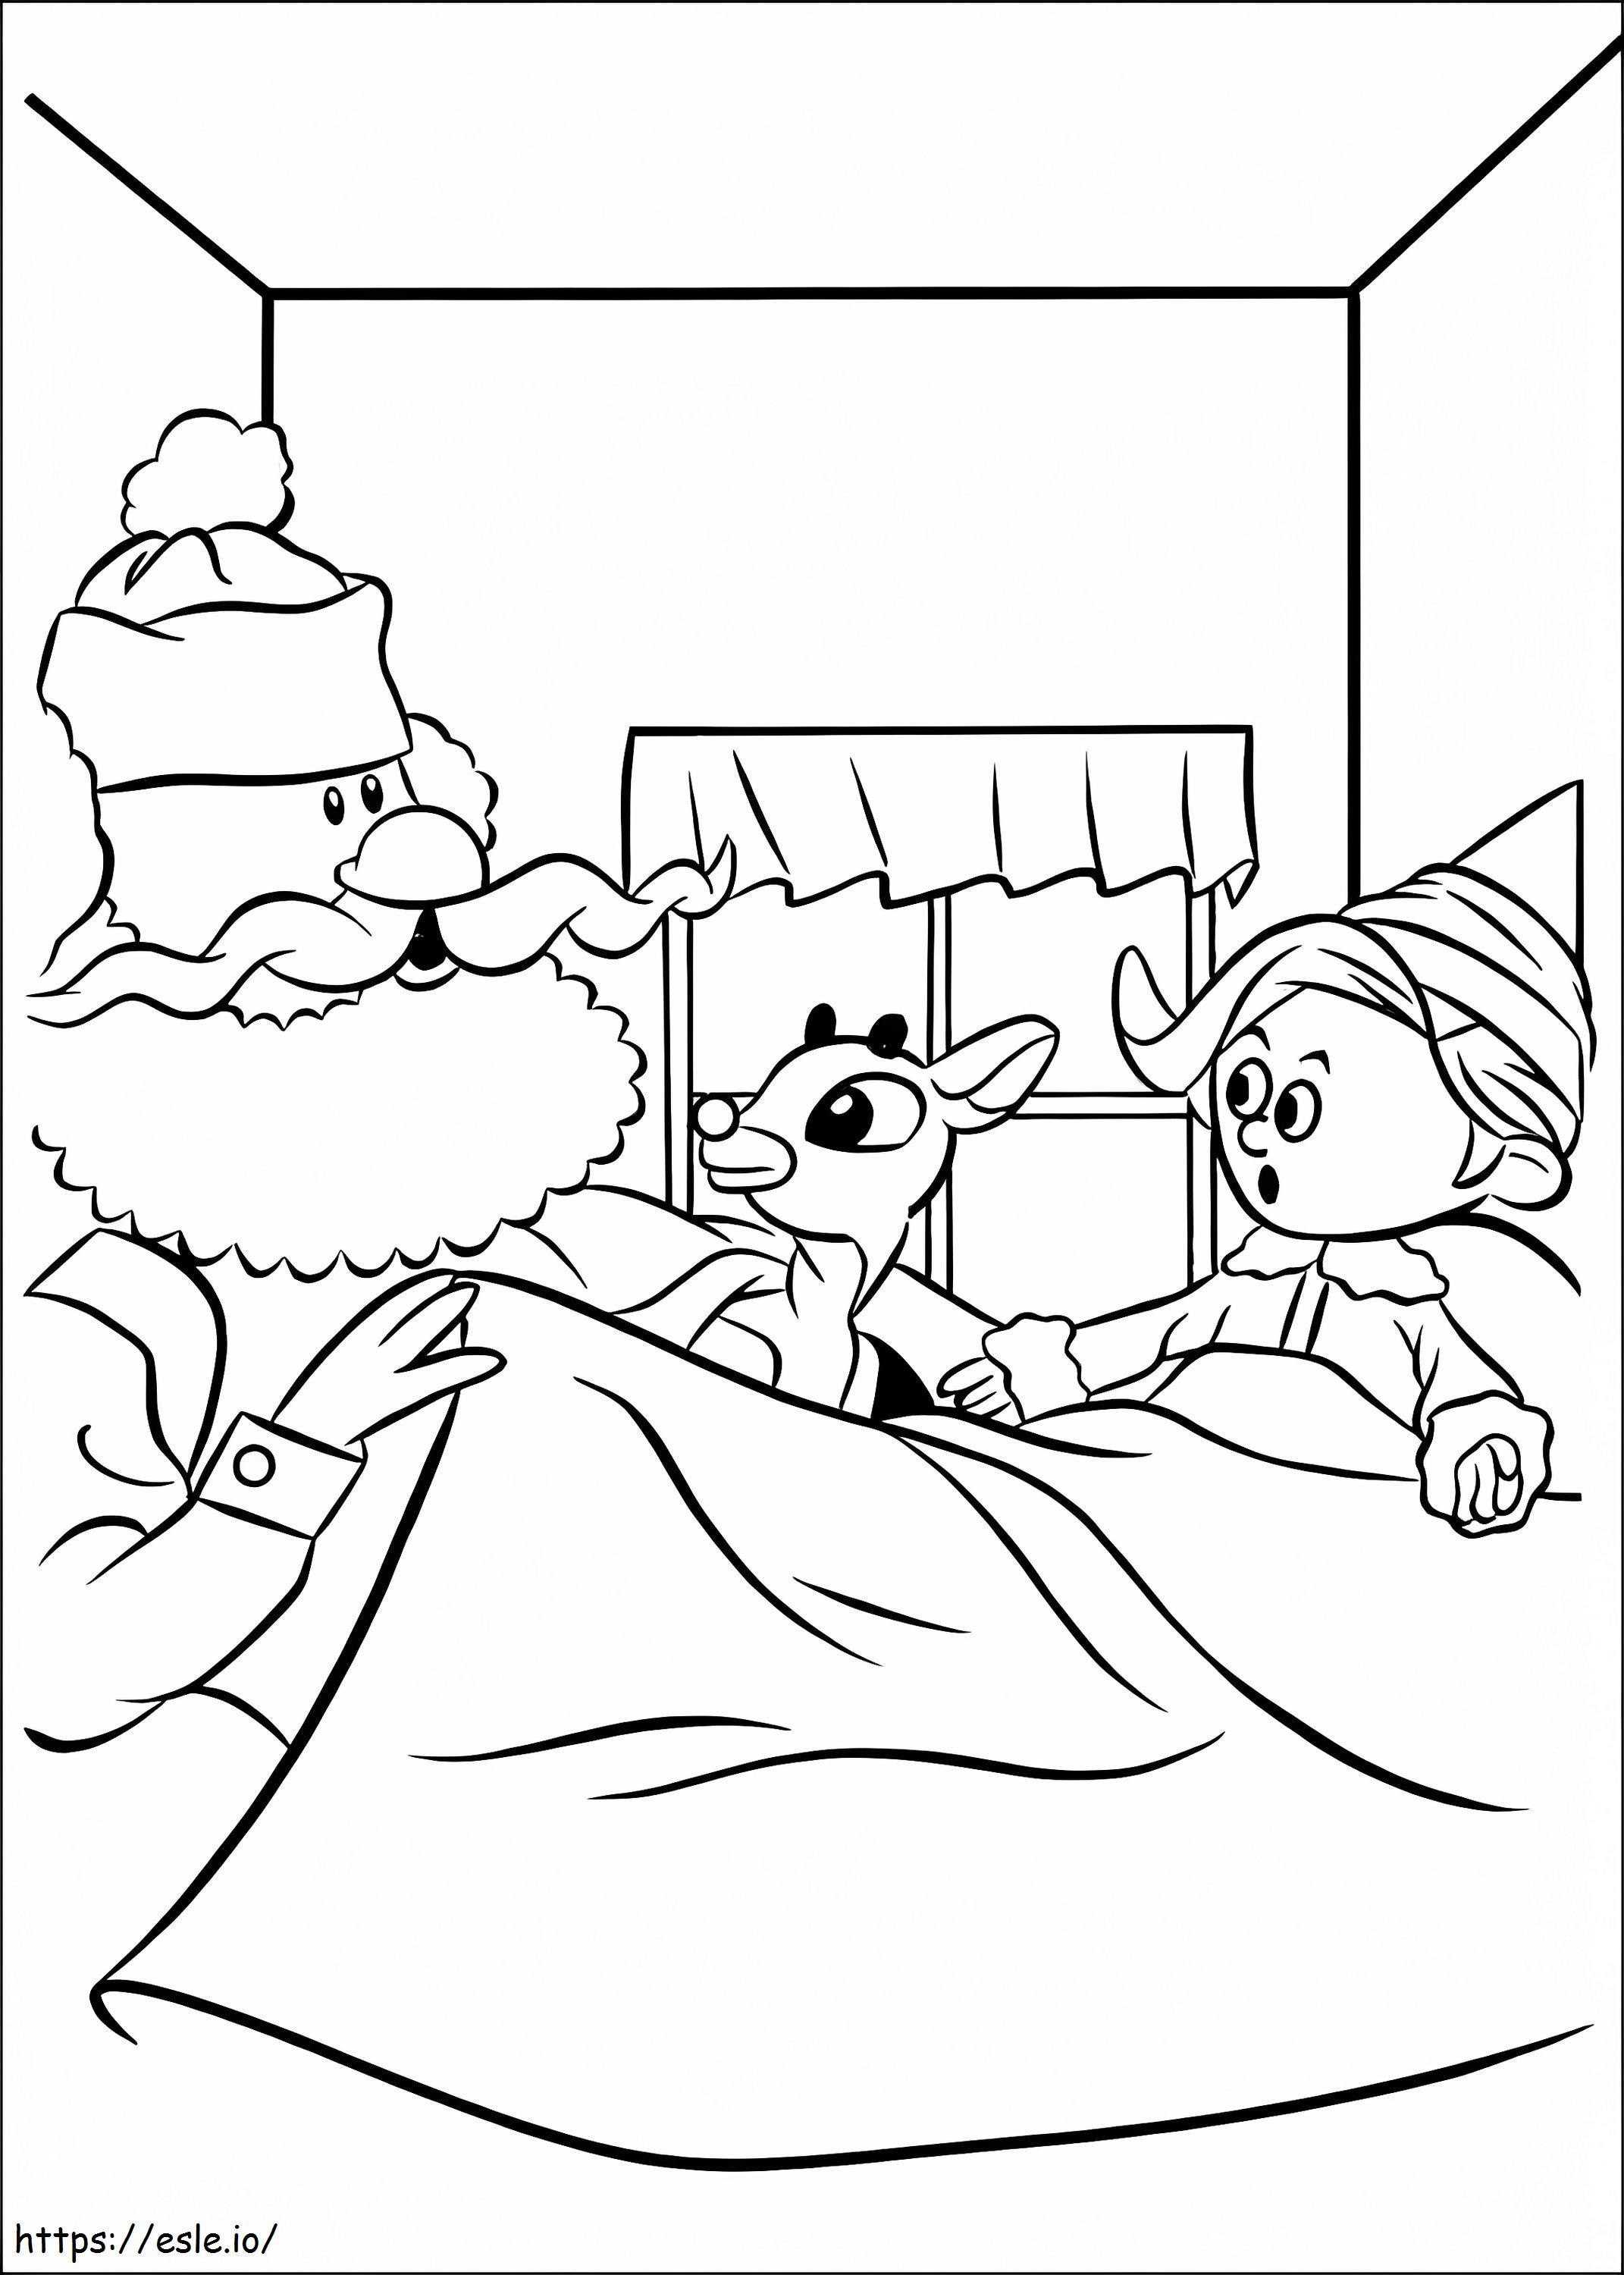 Rudolph The Red Nosed Reindeer 3 coloring page